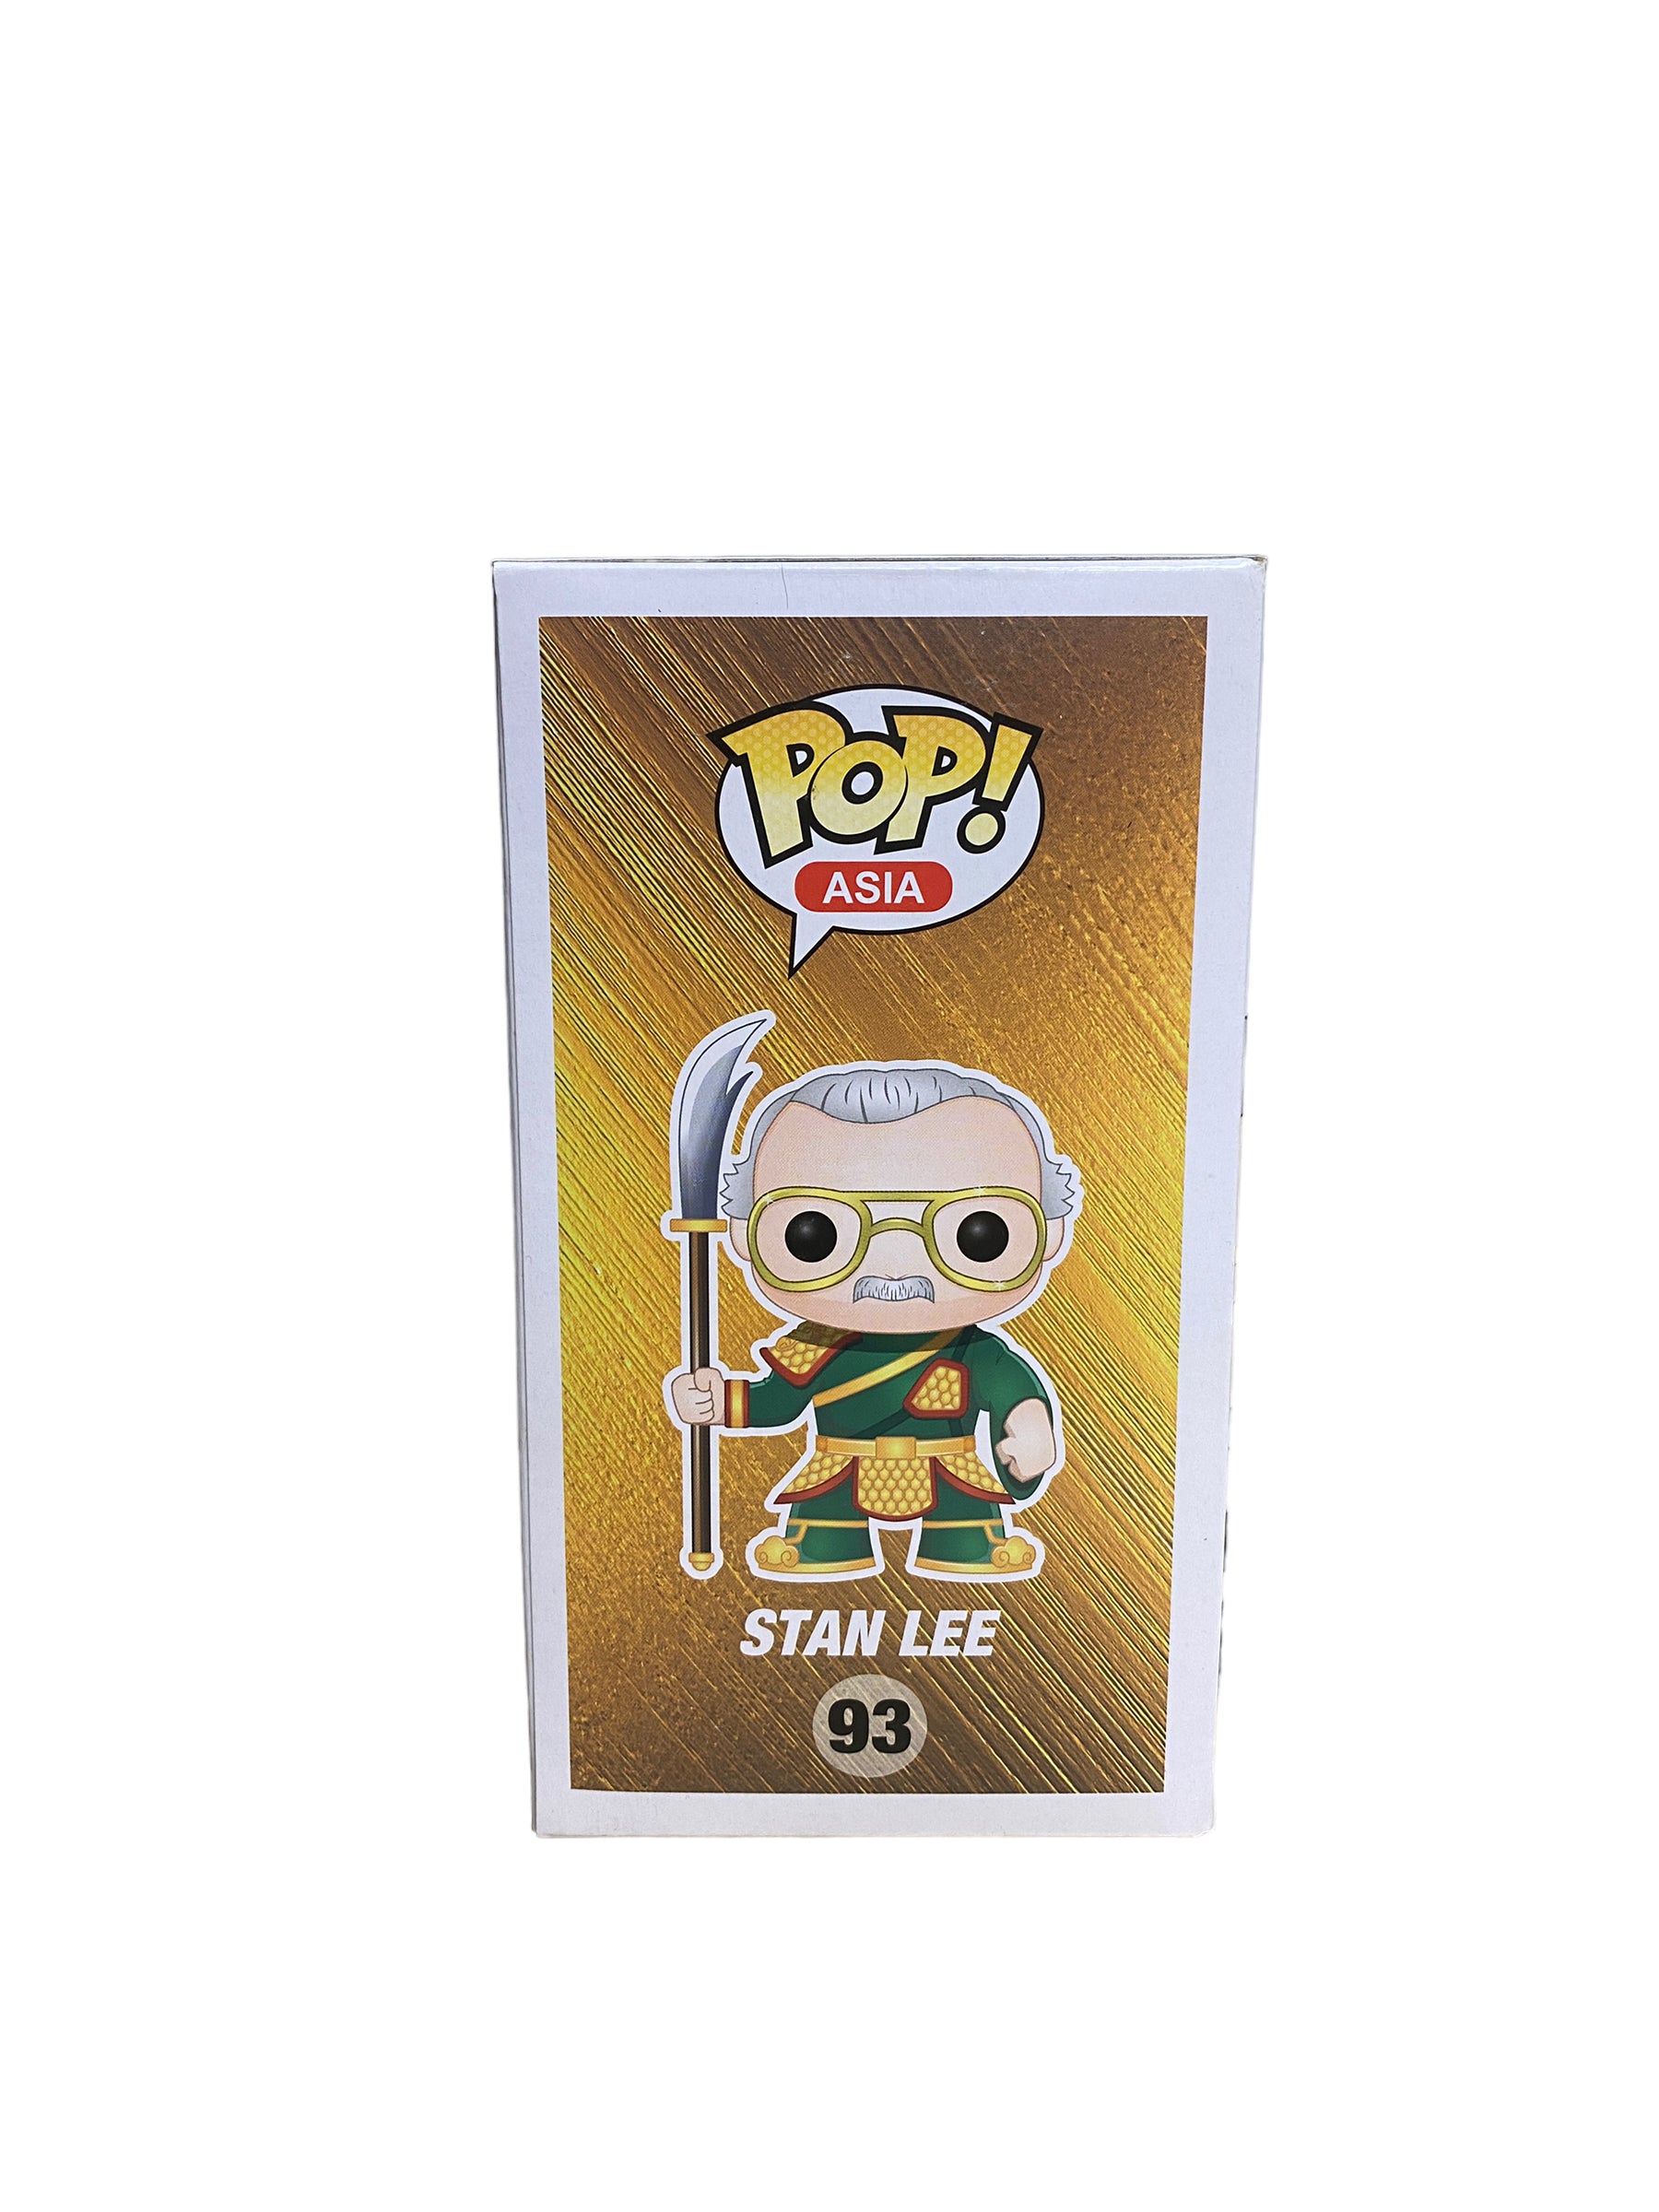 Stan Lee #93 (Guan You Green) Funko Pop! - Toy Con 2016 Exclusive - Condition 7.5/10